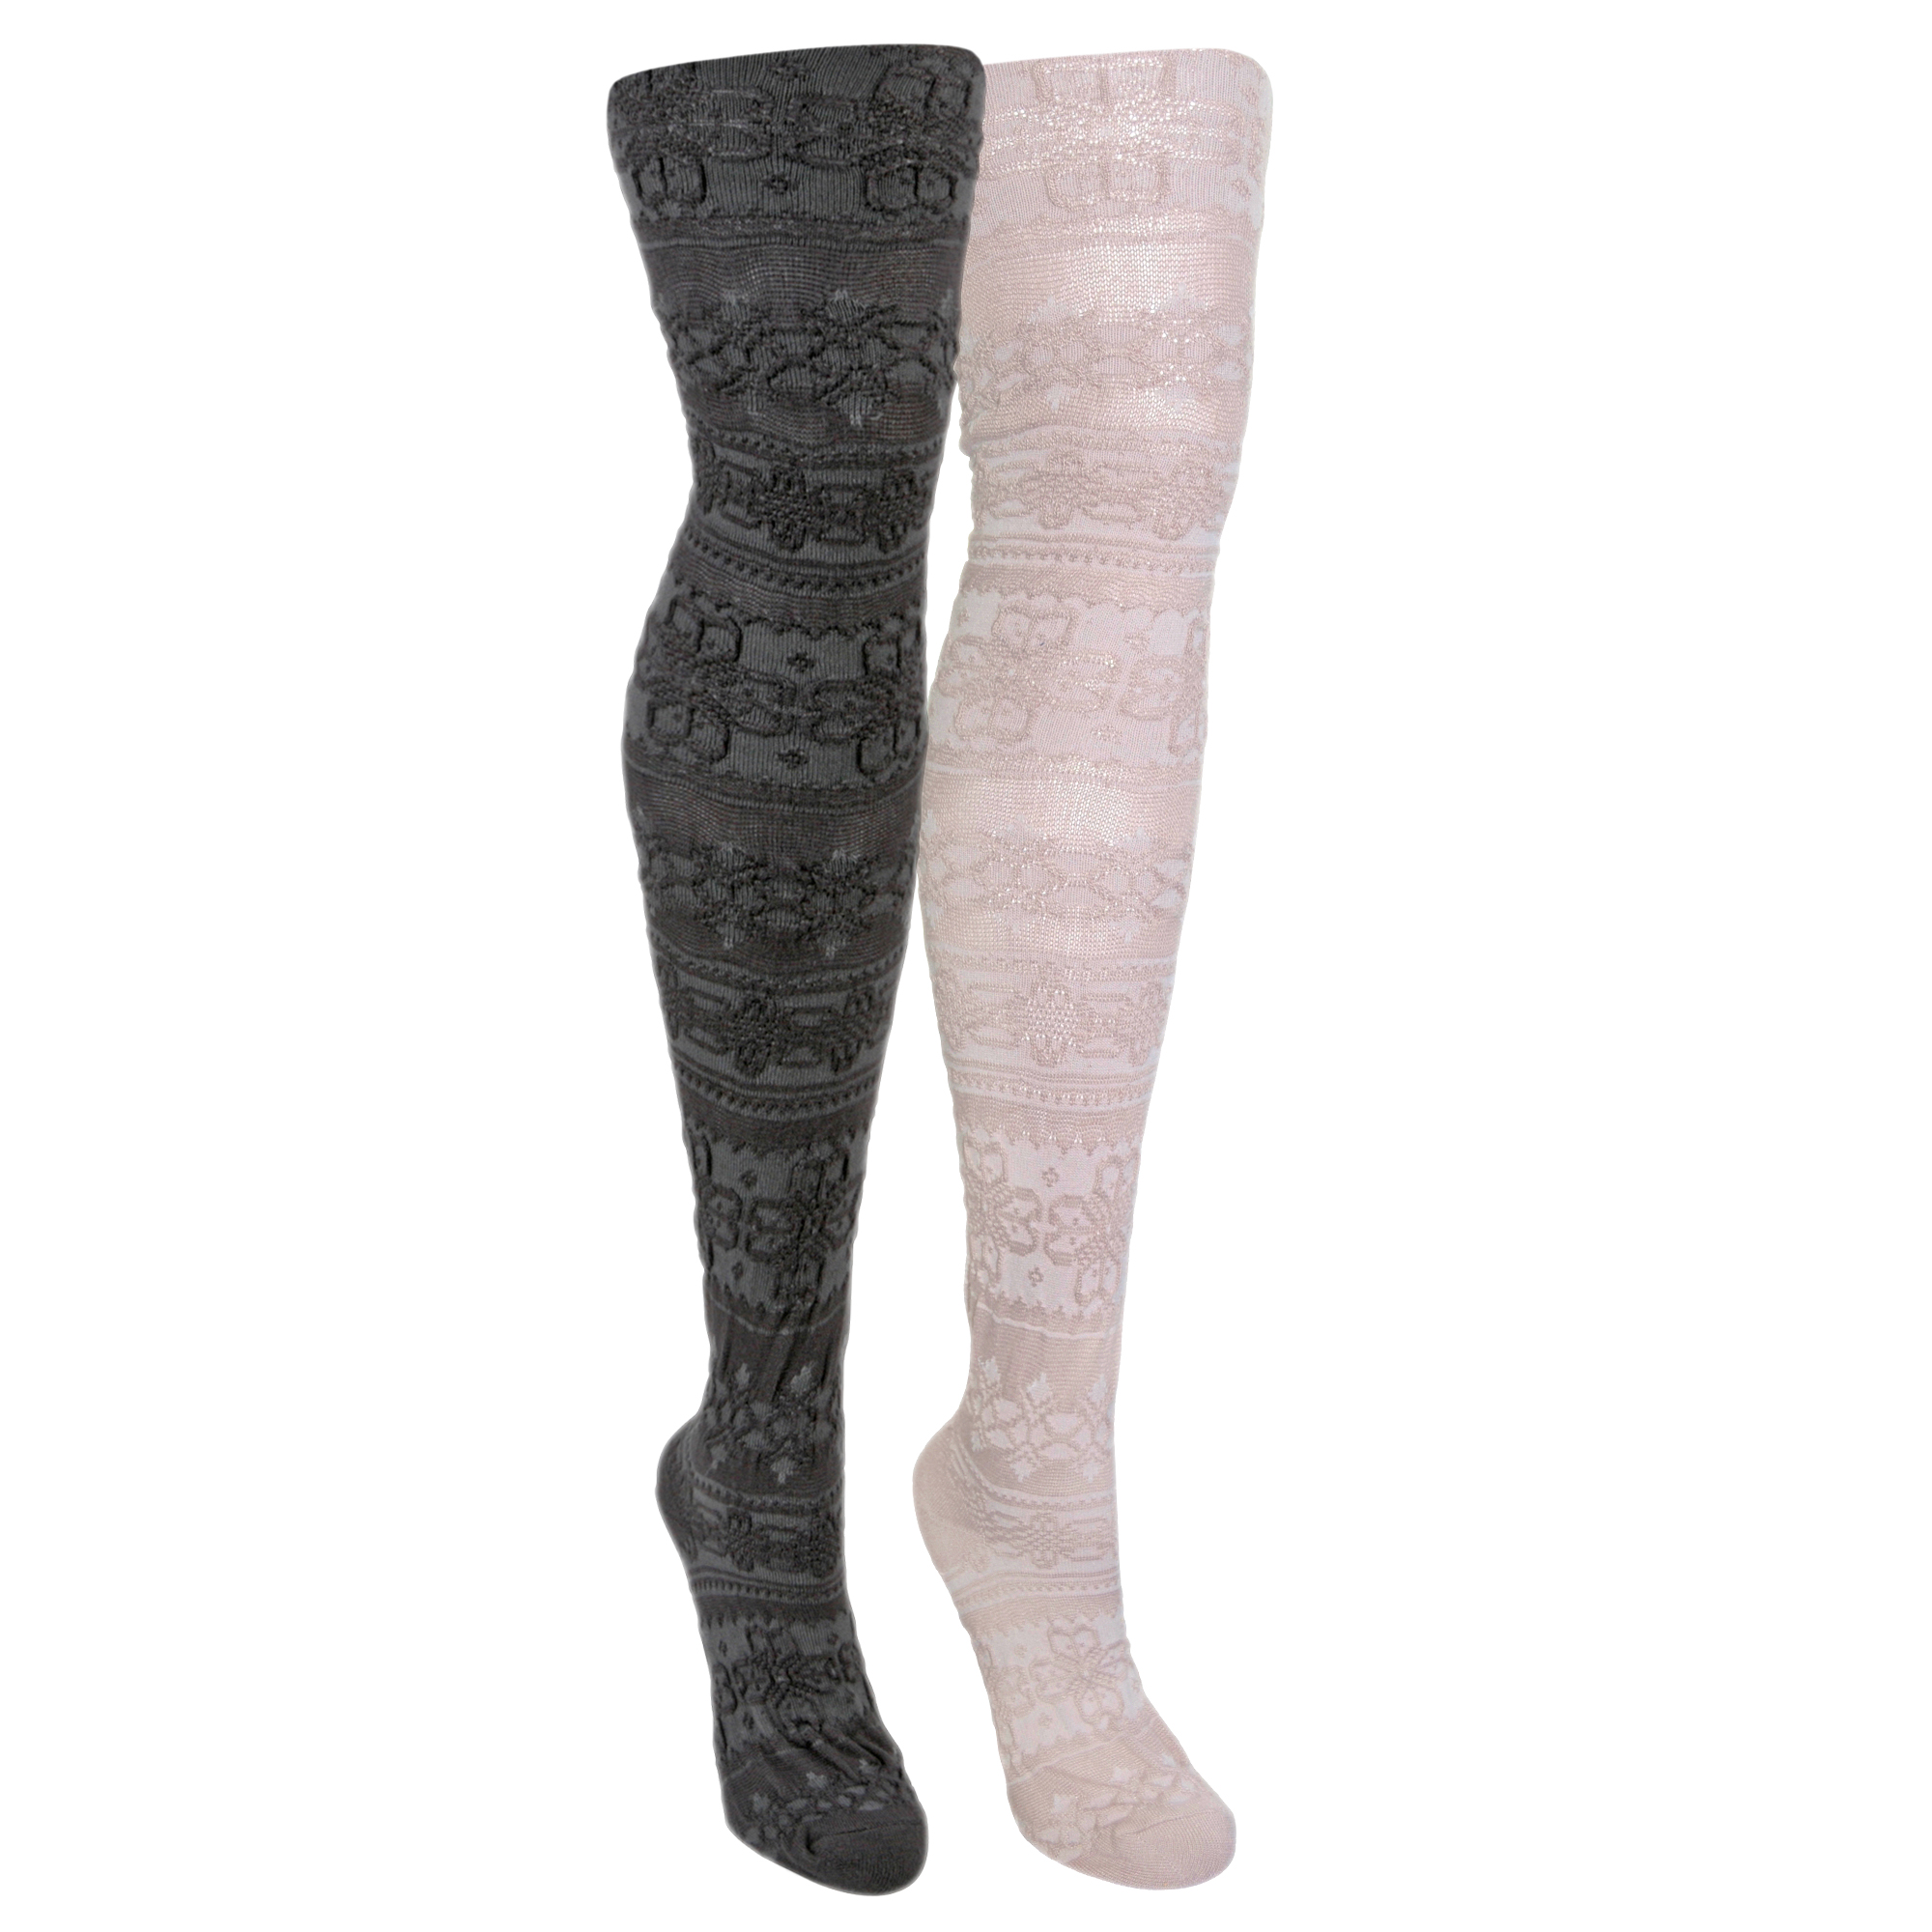 Women's 2 Pair Pack Patterned Microfiber Tights